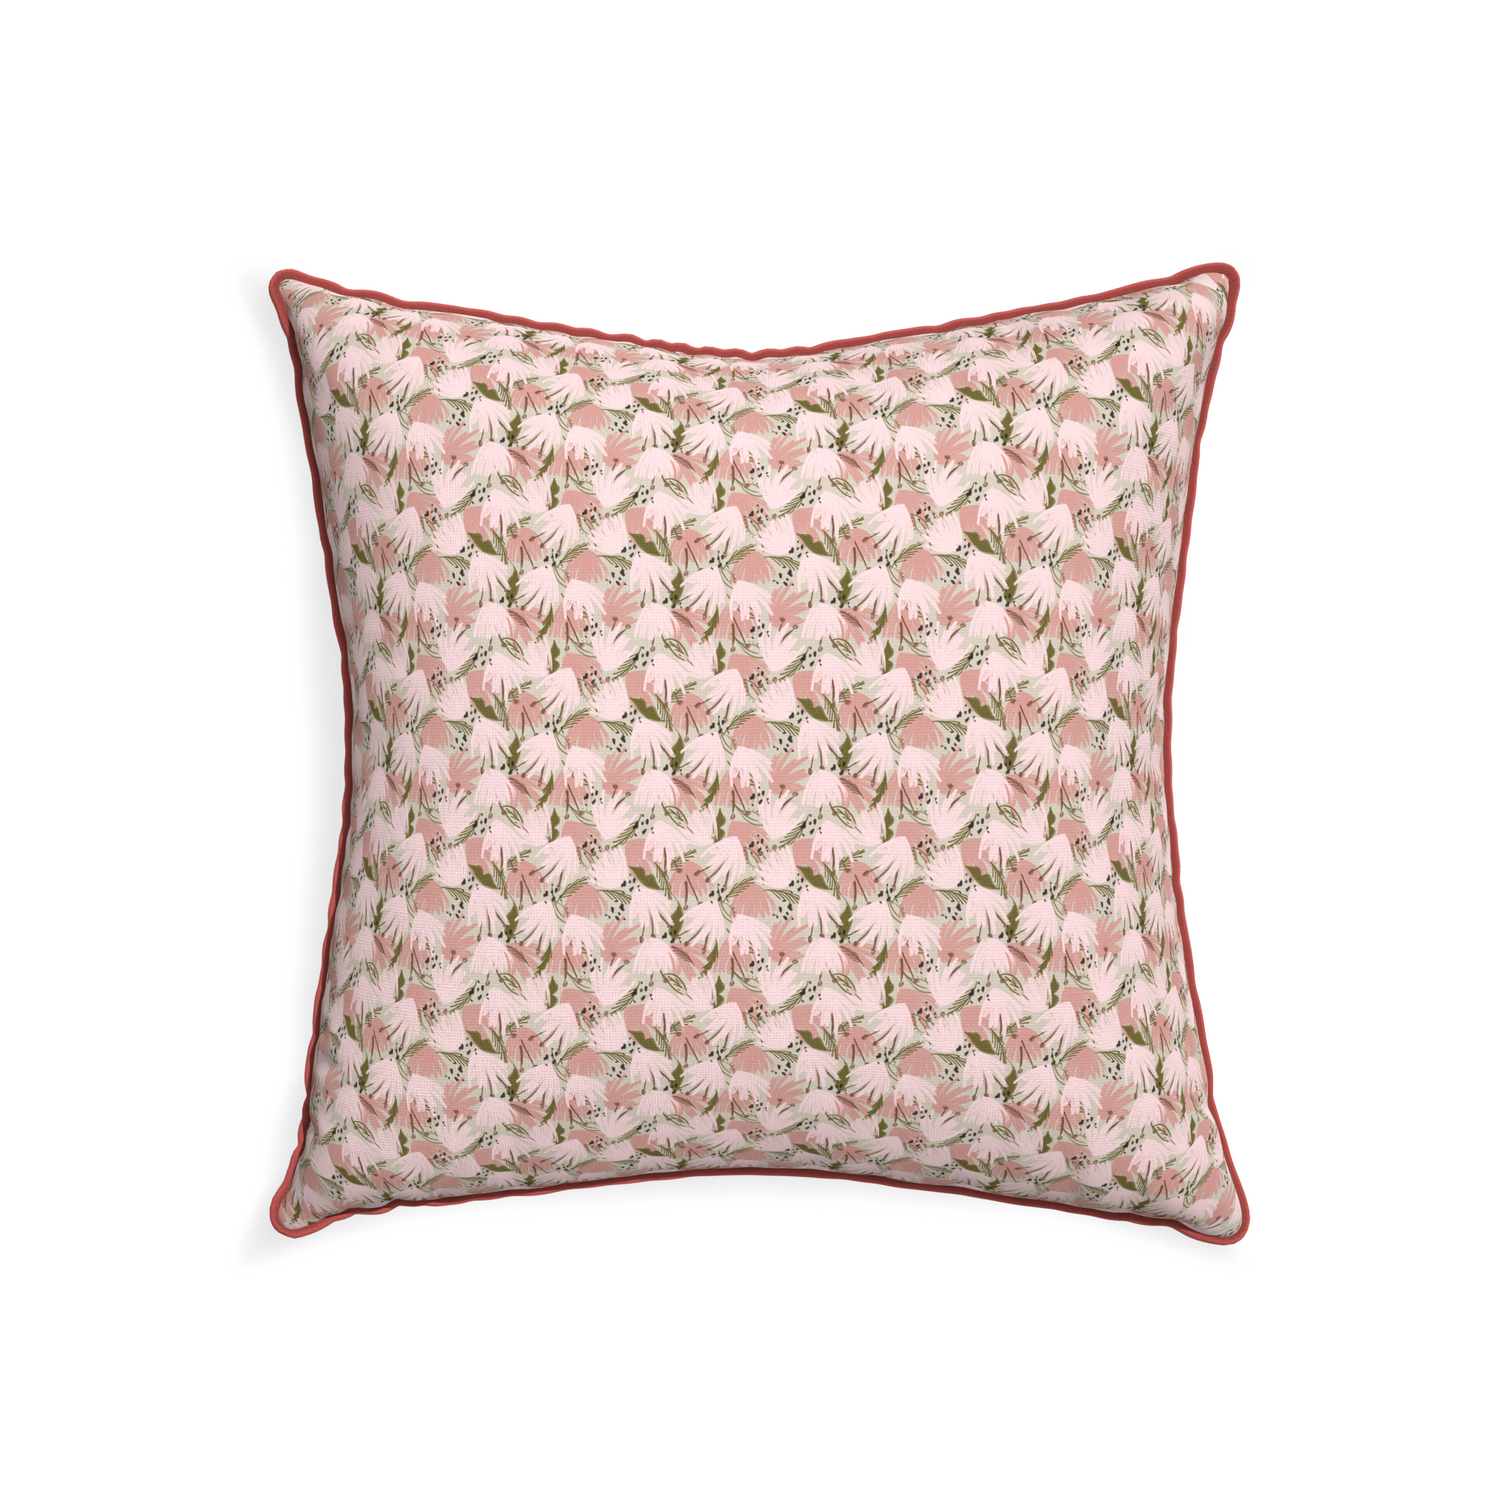 22-square eden pink custom pillow with c piping on white background